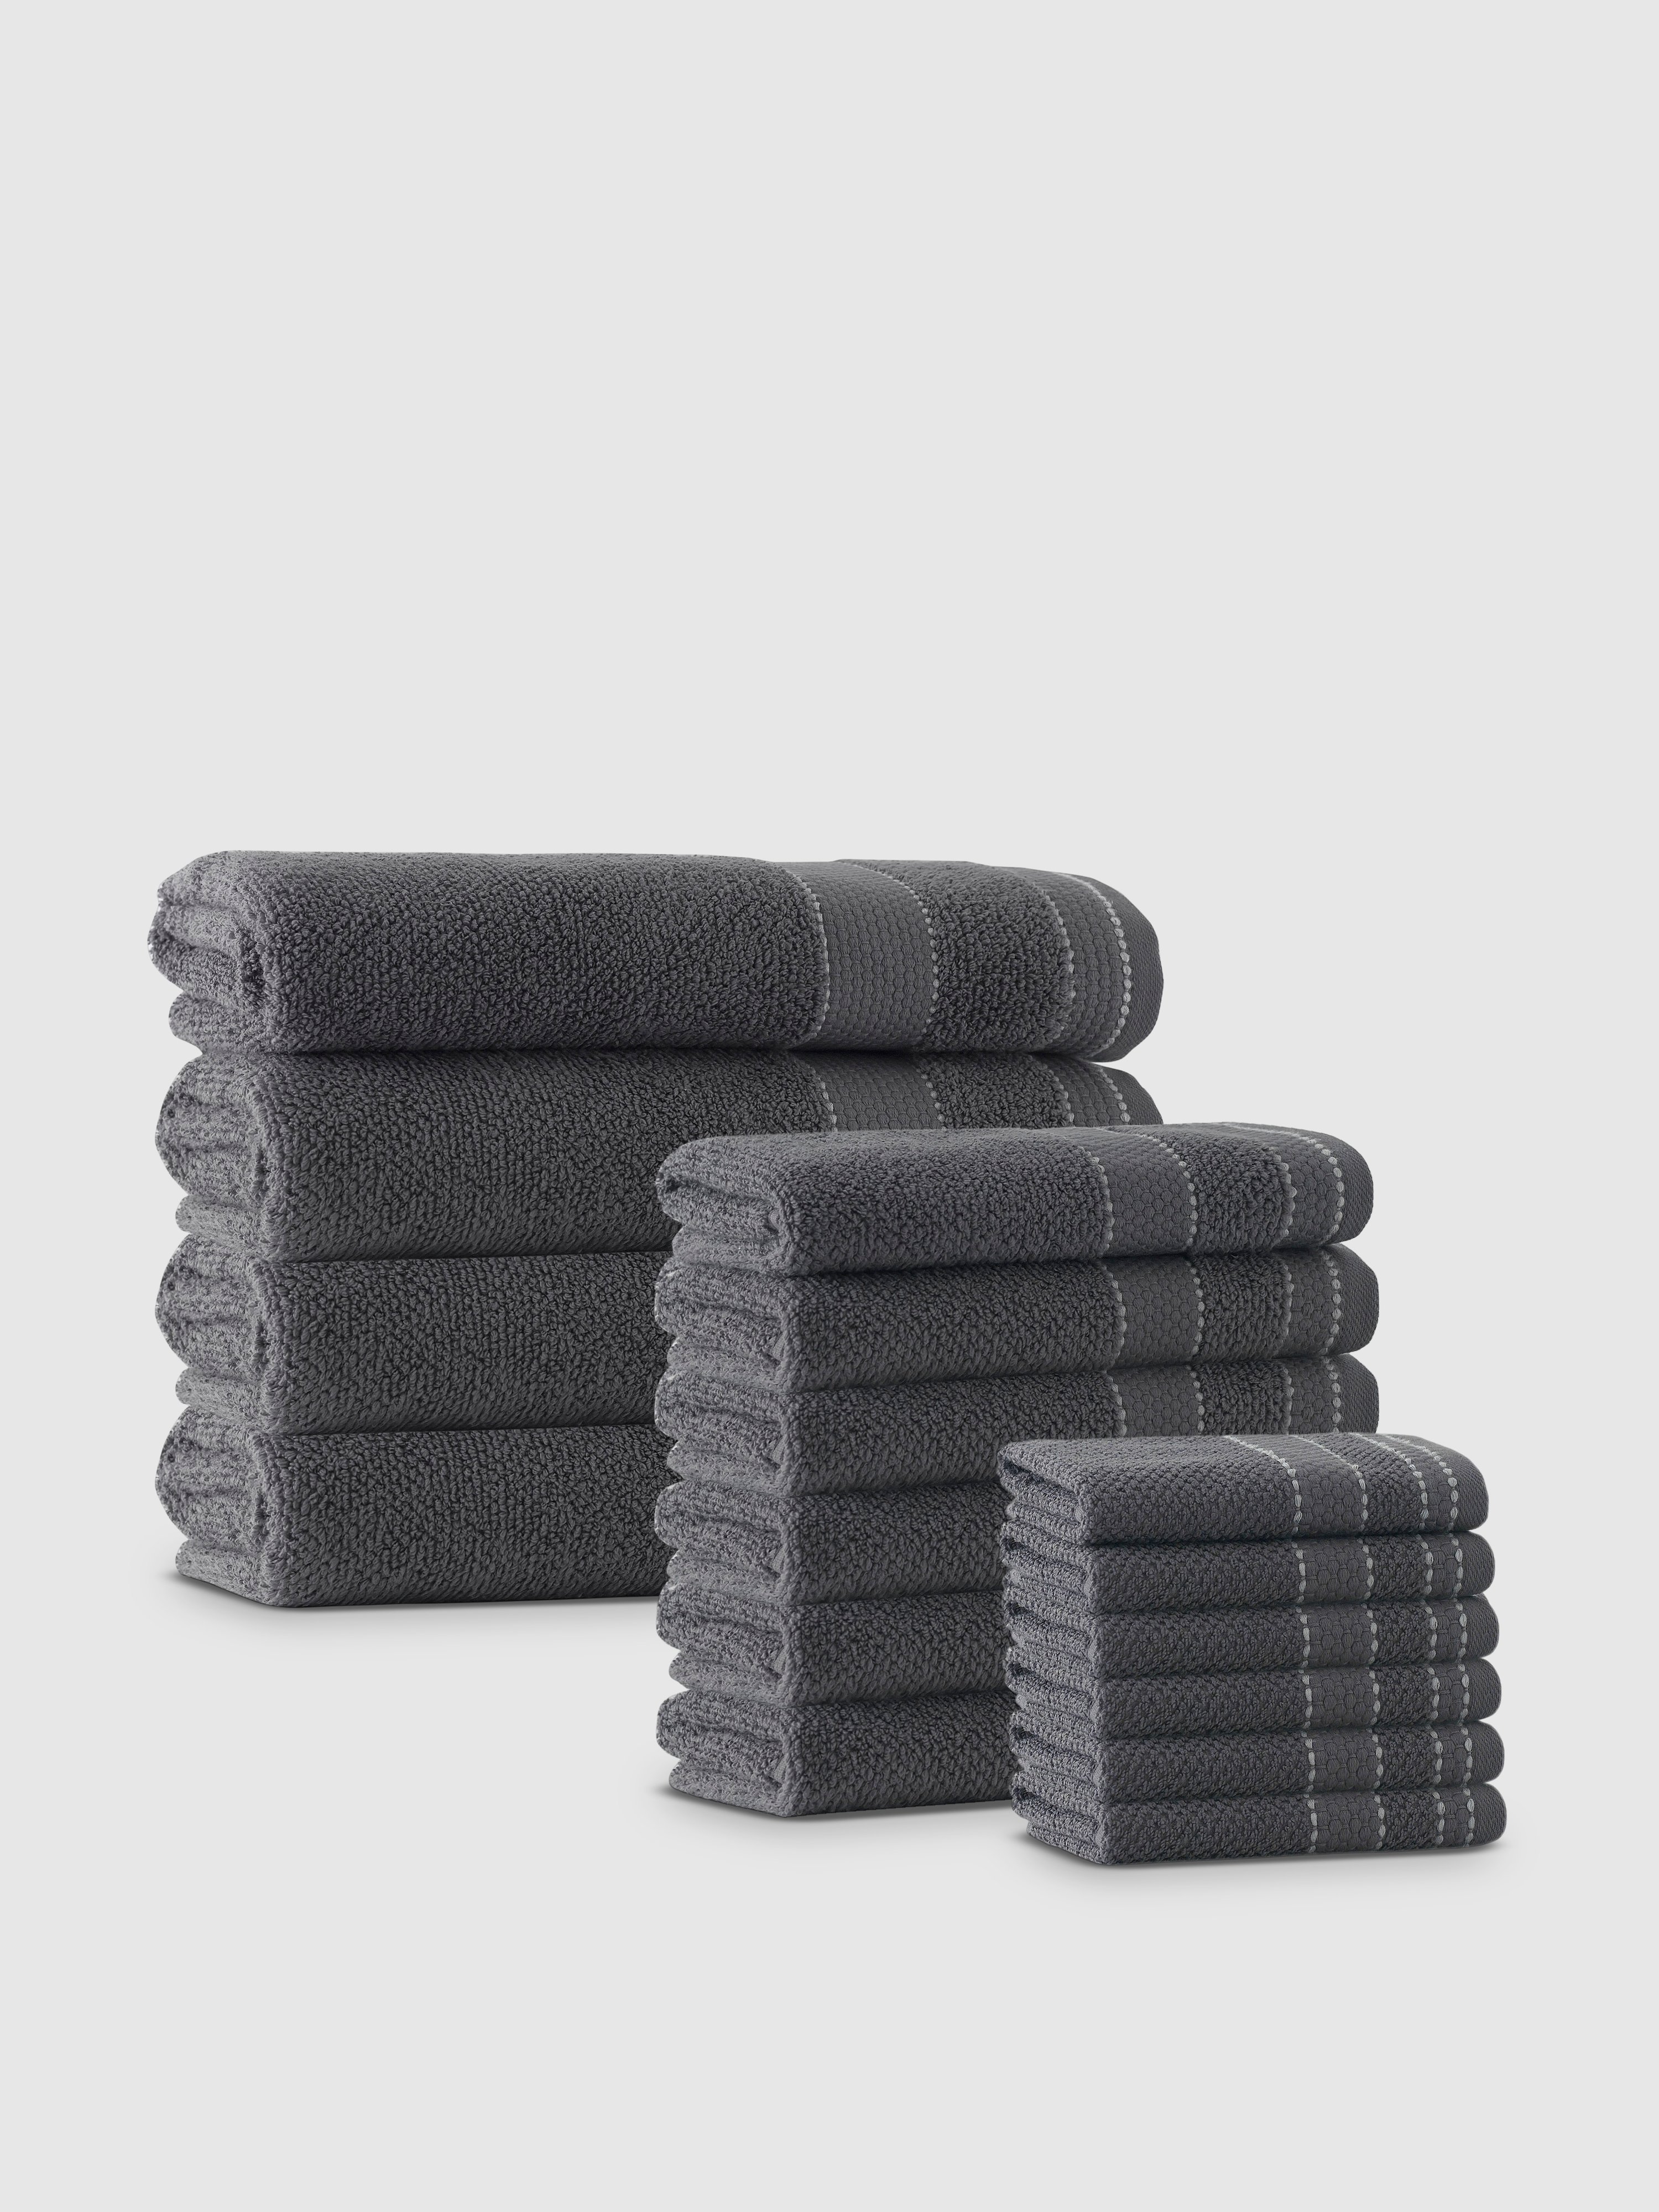 Enchante Home Monroe Turkish Cotton Towel Set Of 16 In Anthracite